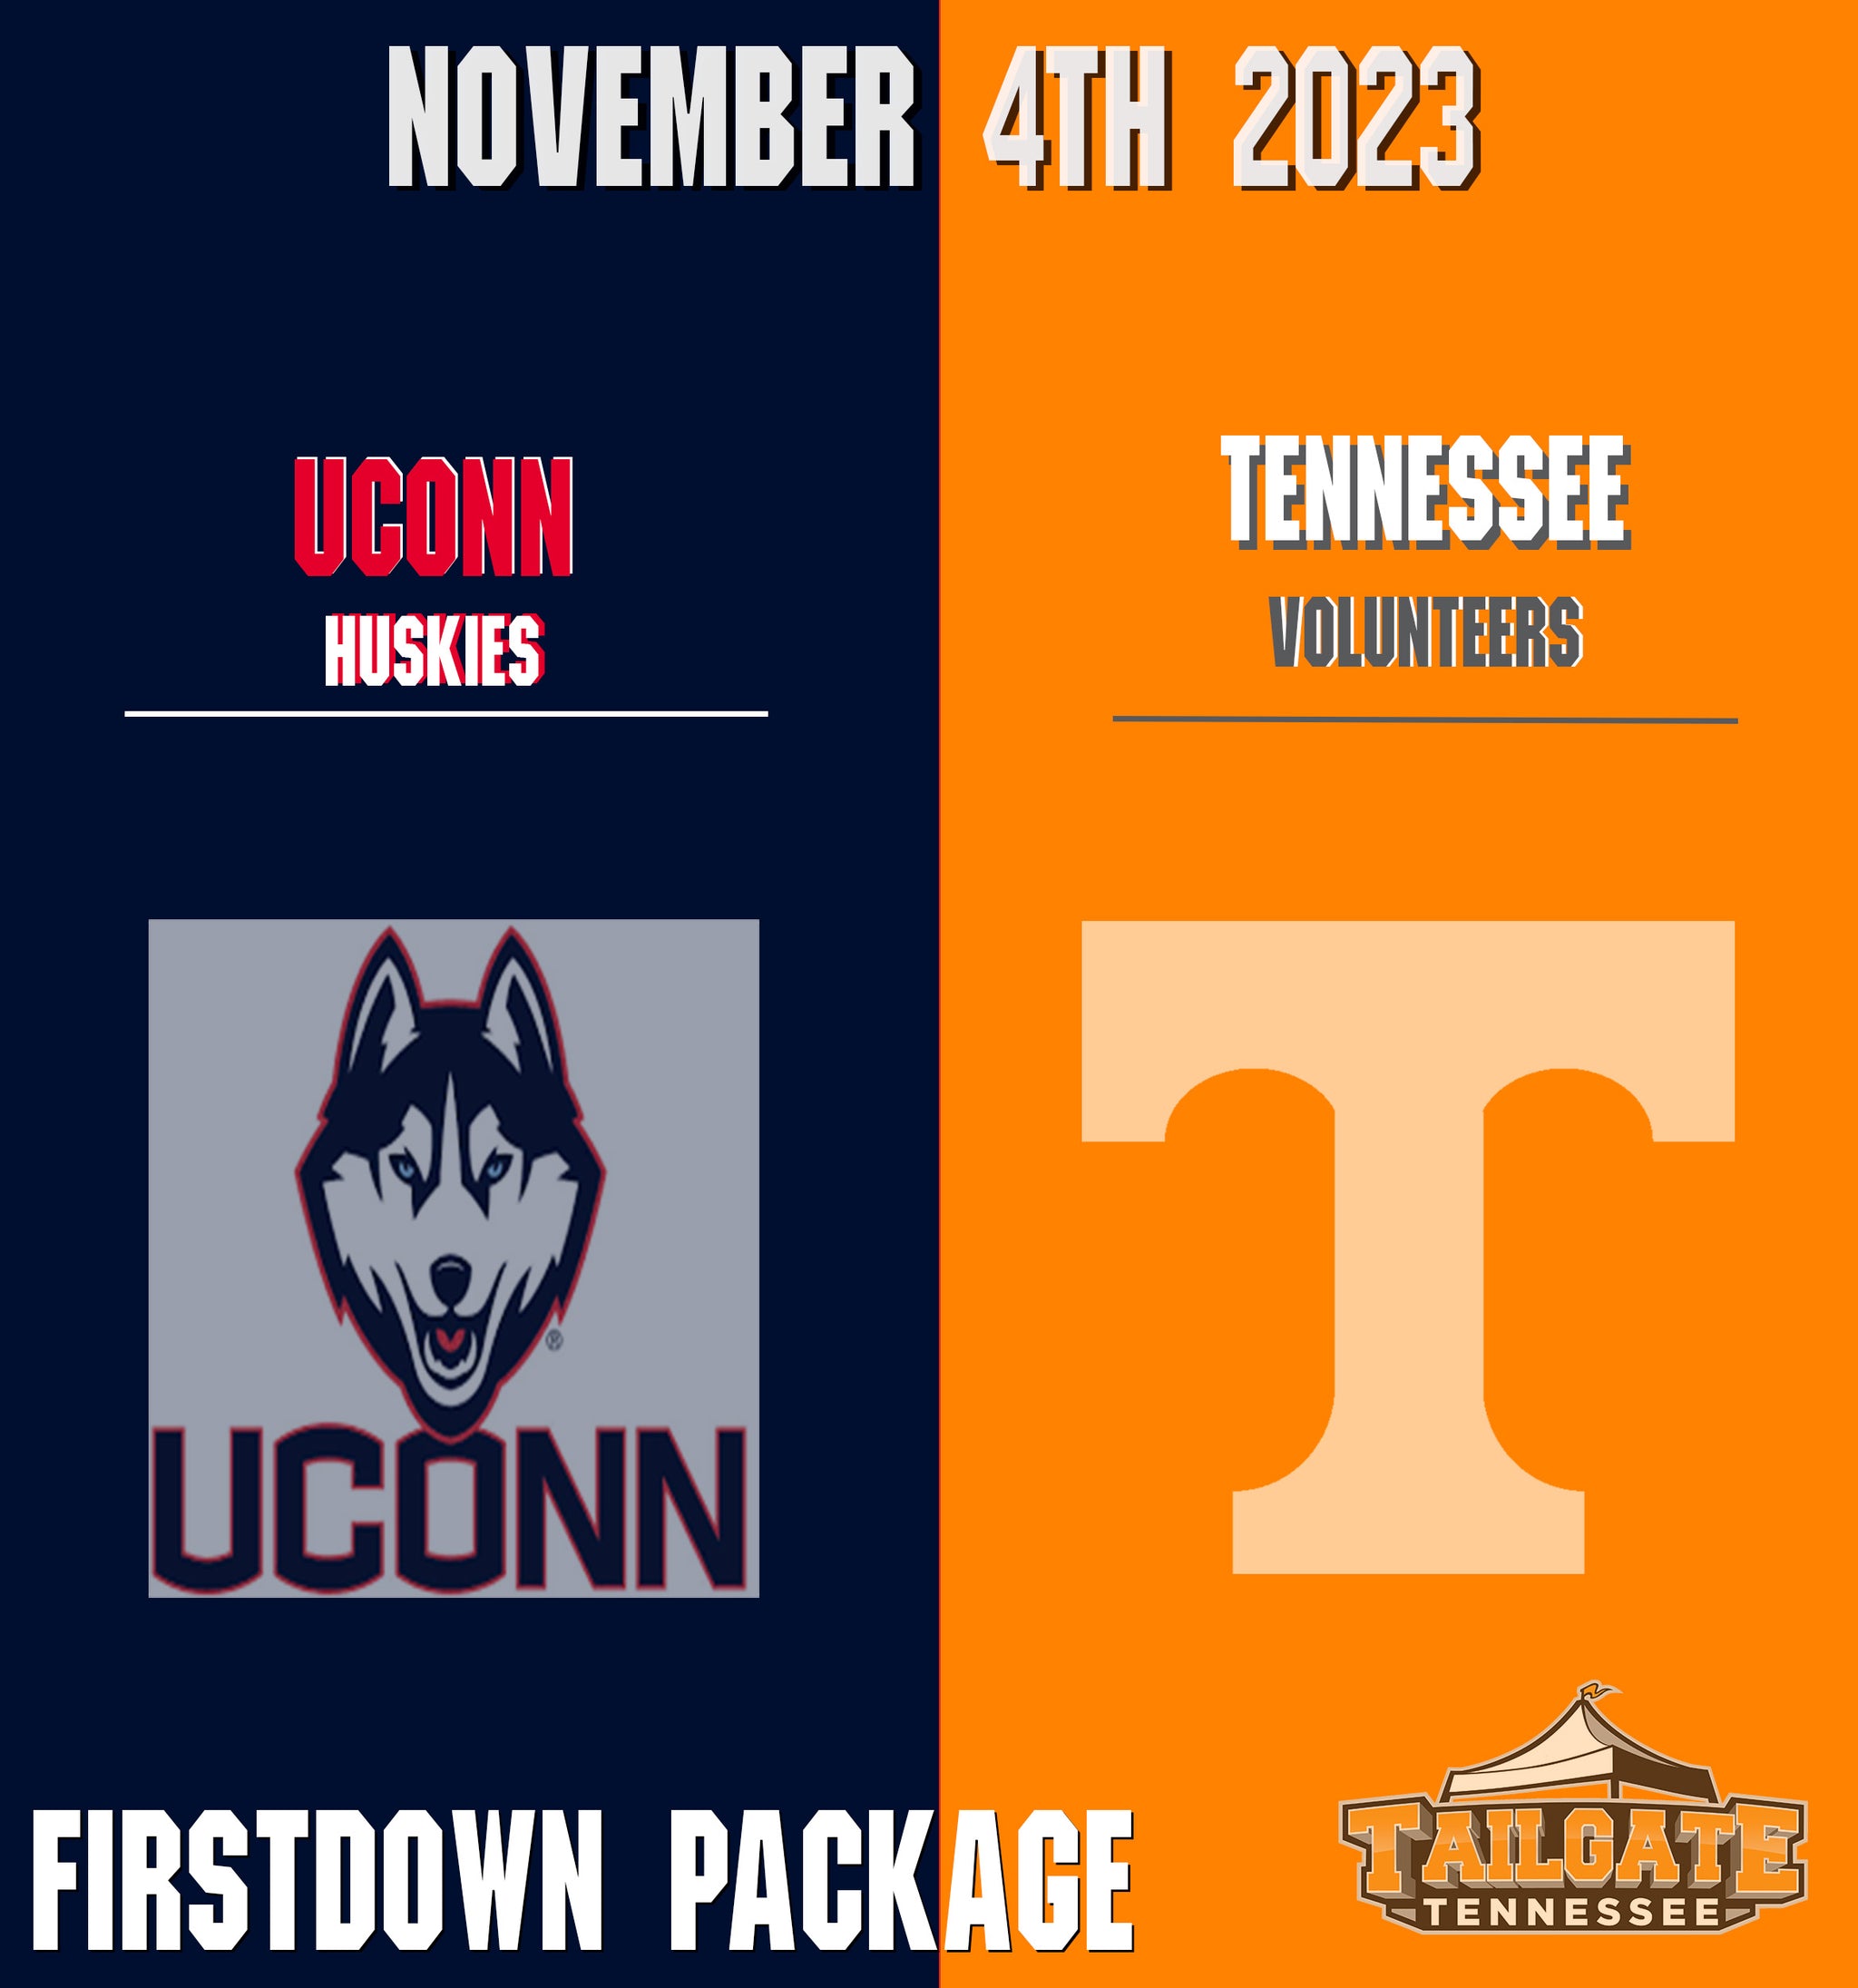 UCONN FIRST DOWN PACKAGE  - 11/4